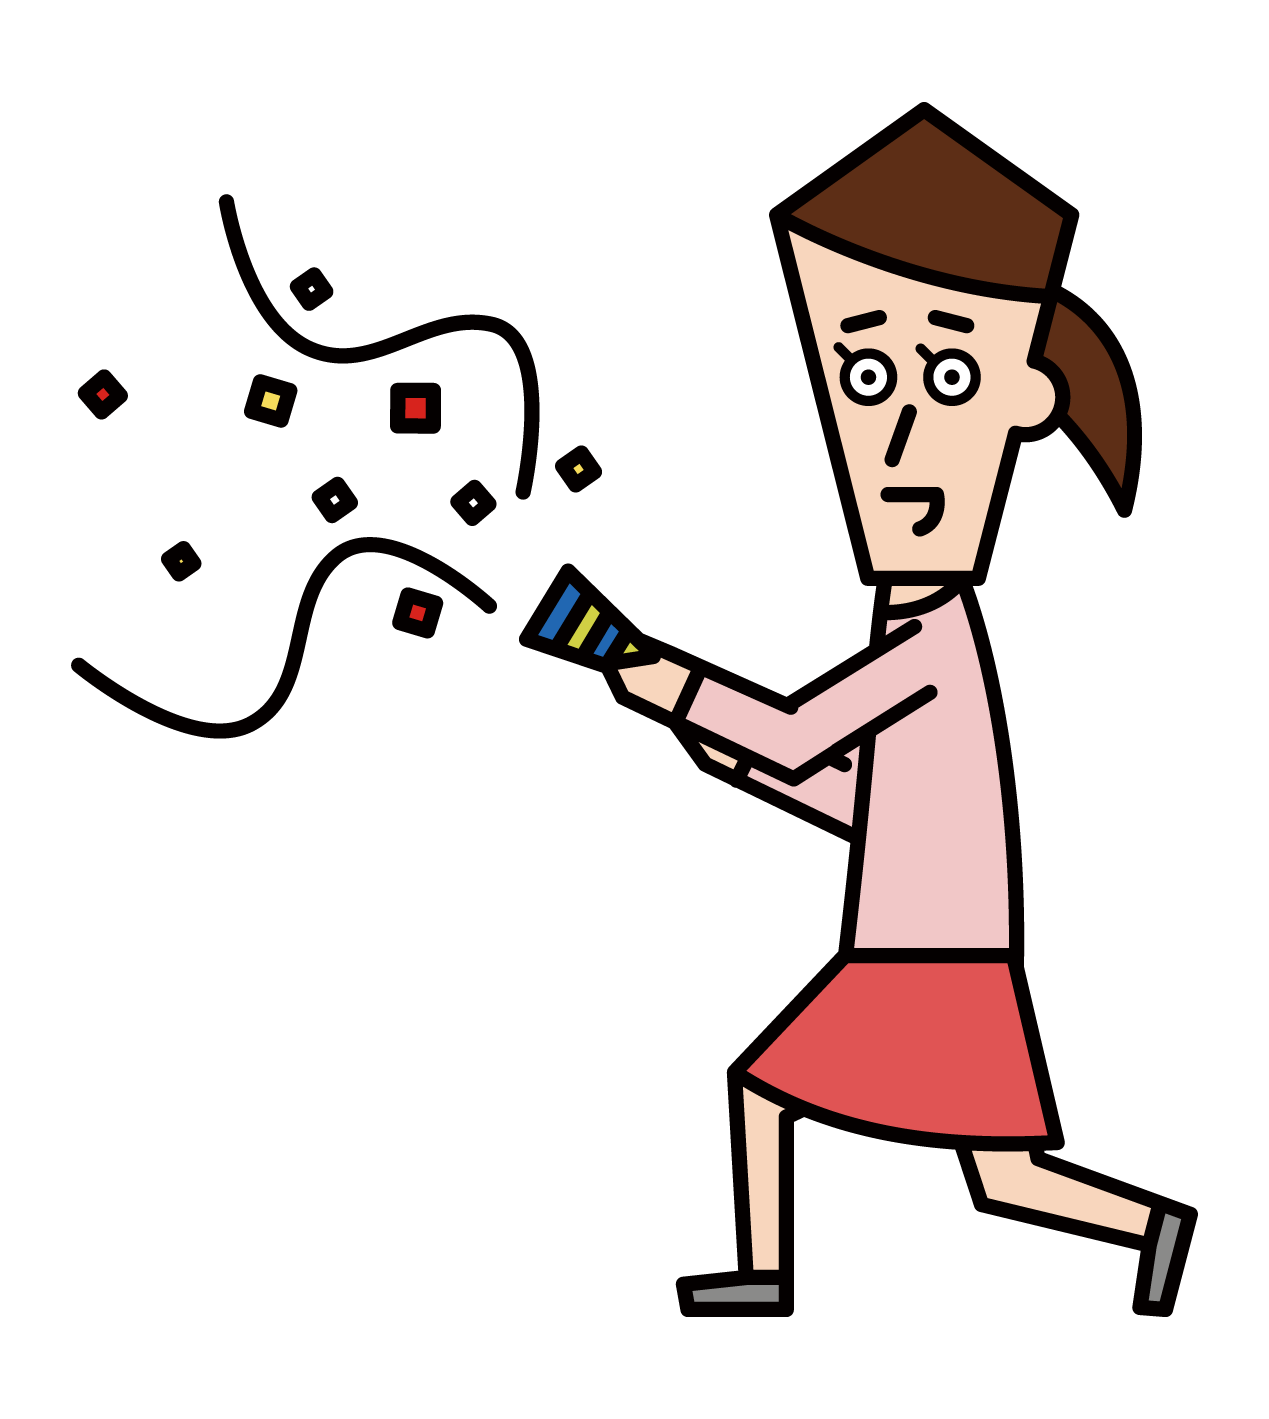 Illustration of a woman who celebrates with crackers